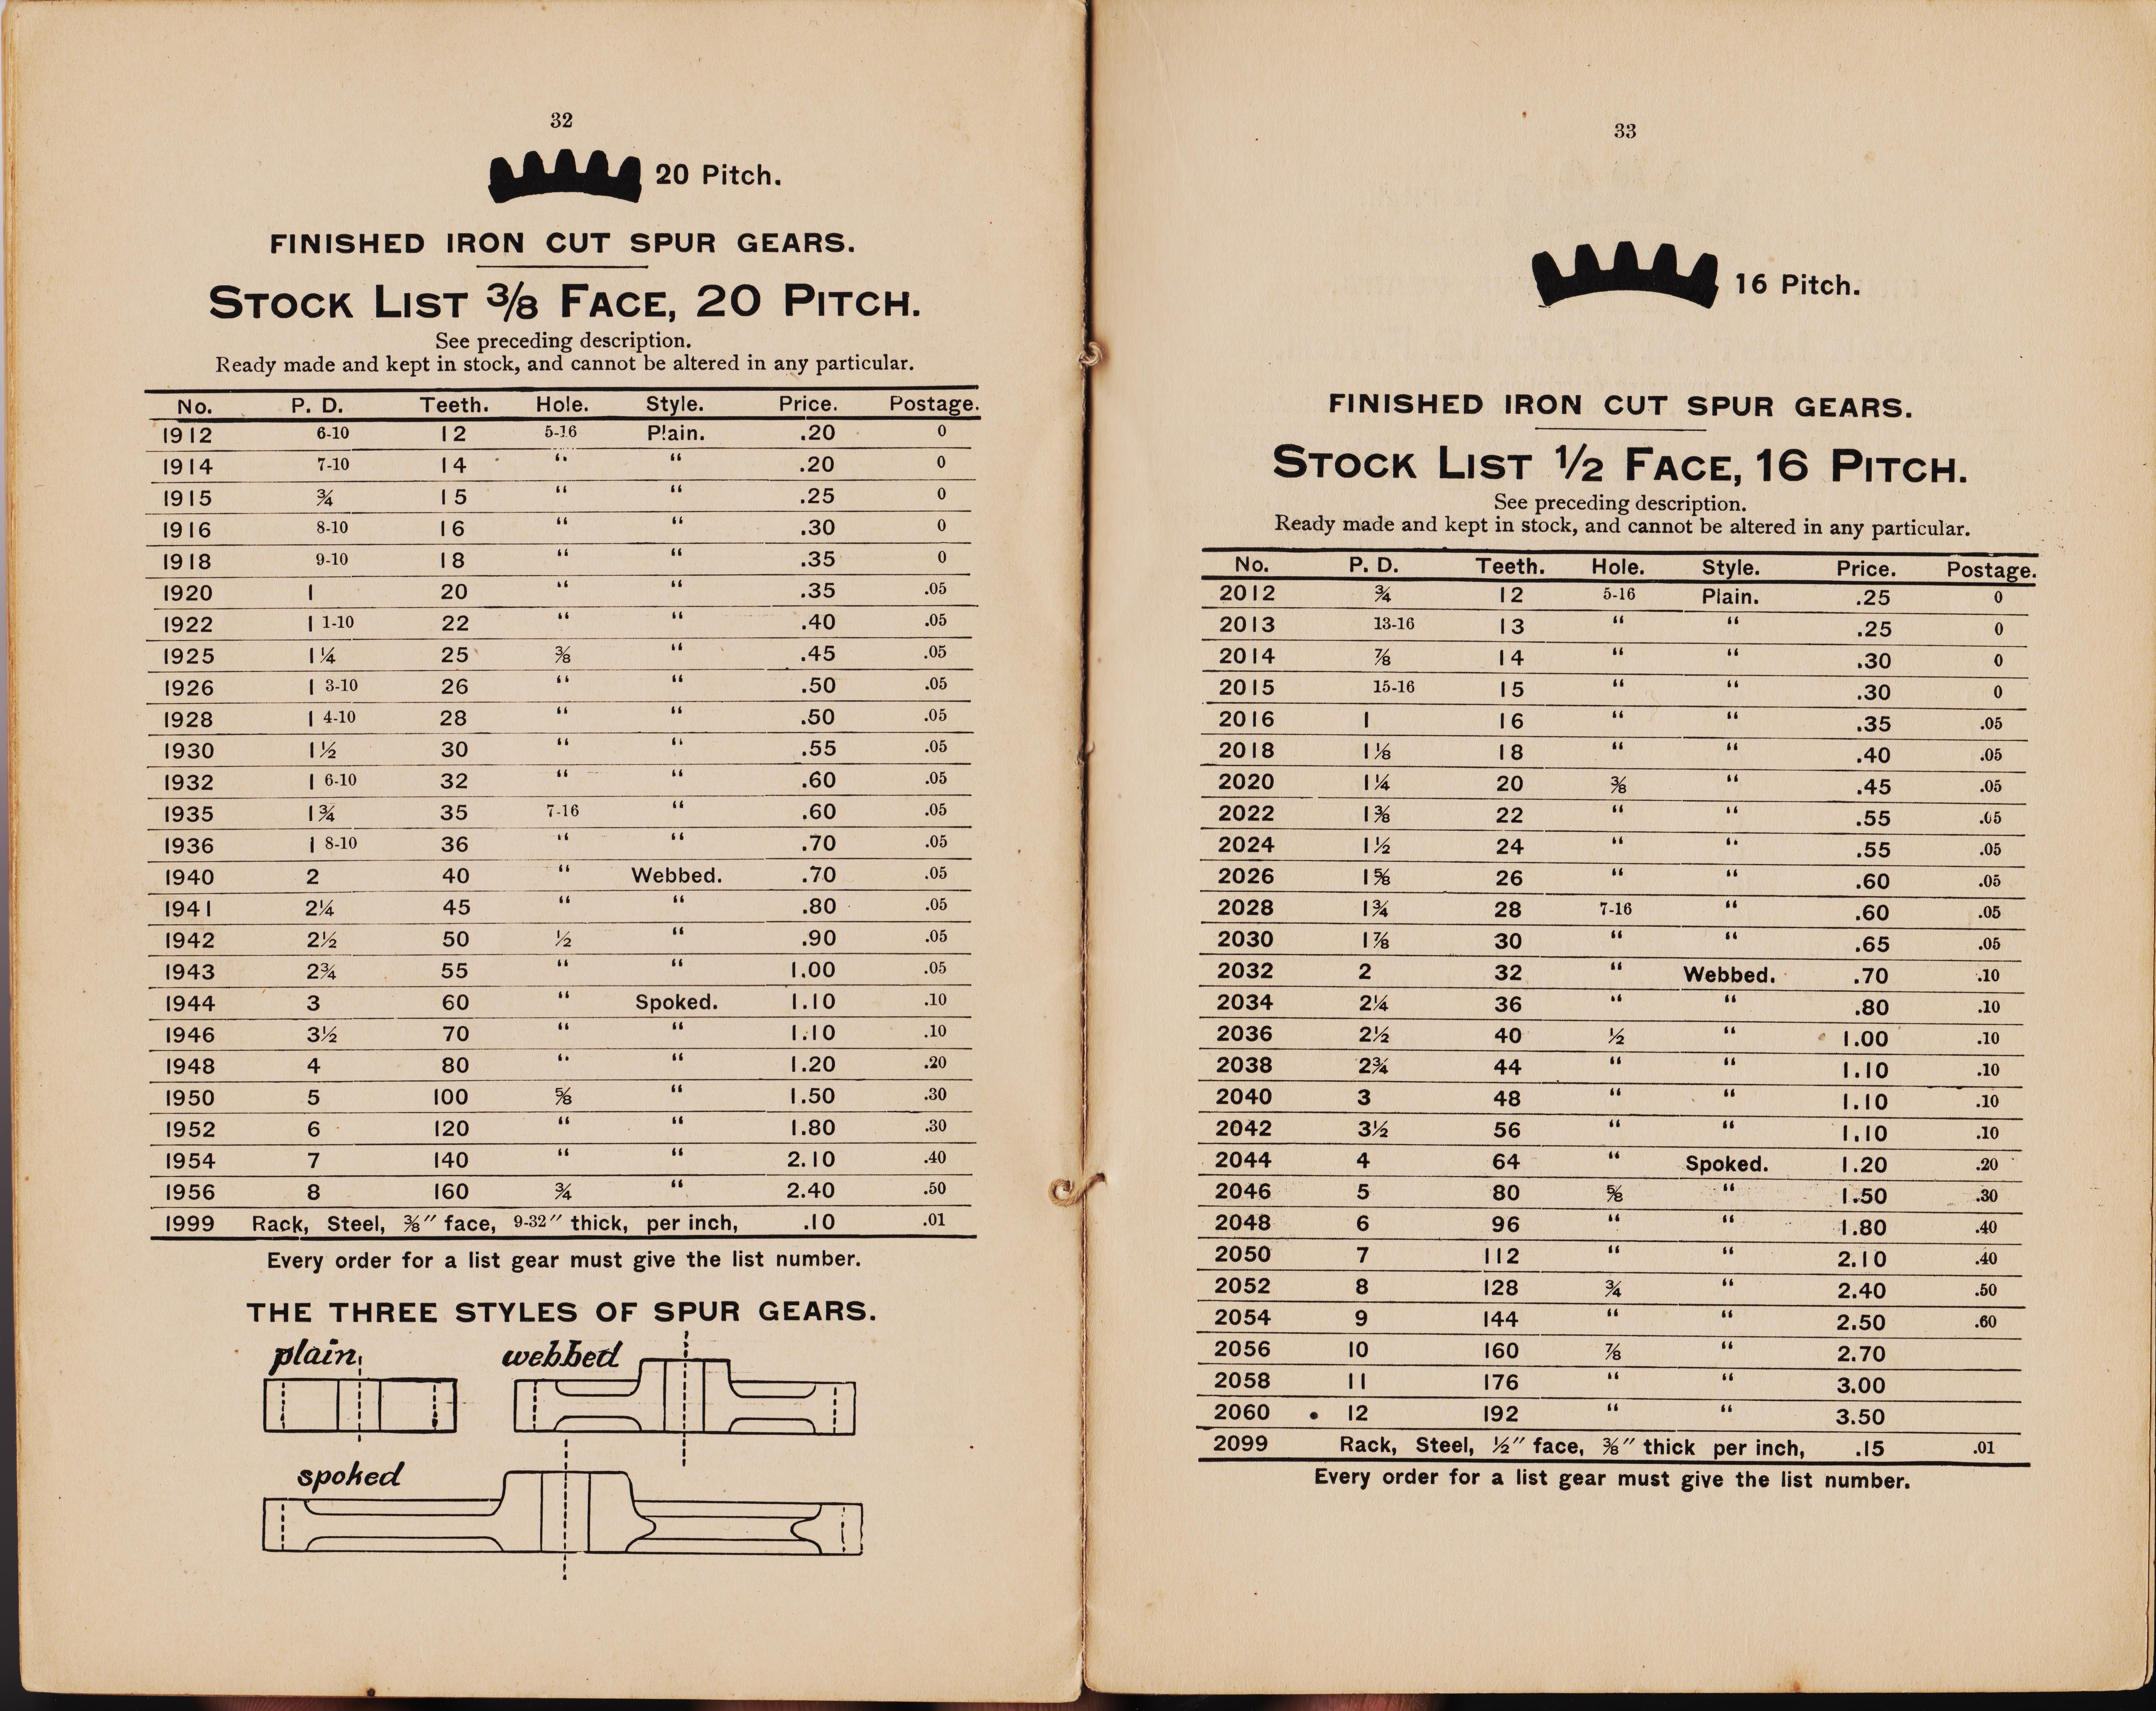 http://antiquemachinery.com/images-2020/Grants-Gear-Book-Lexington-Gear-Works-1892-page-32-33-Stock-list-three-eights-face-20-Pitch-one-half-face-16-Pitch.jpg